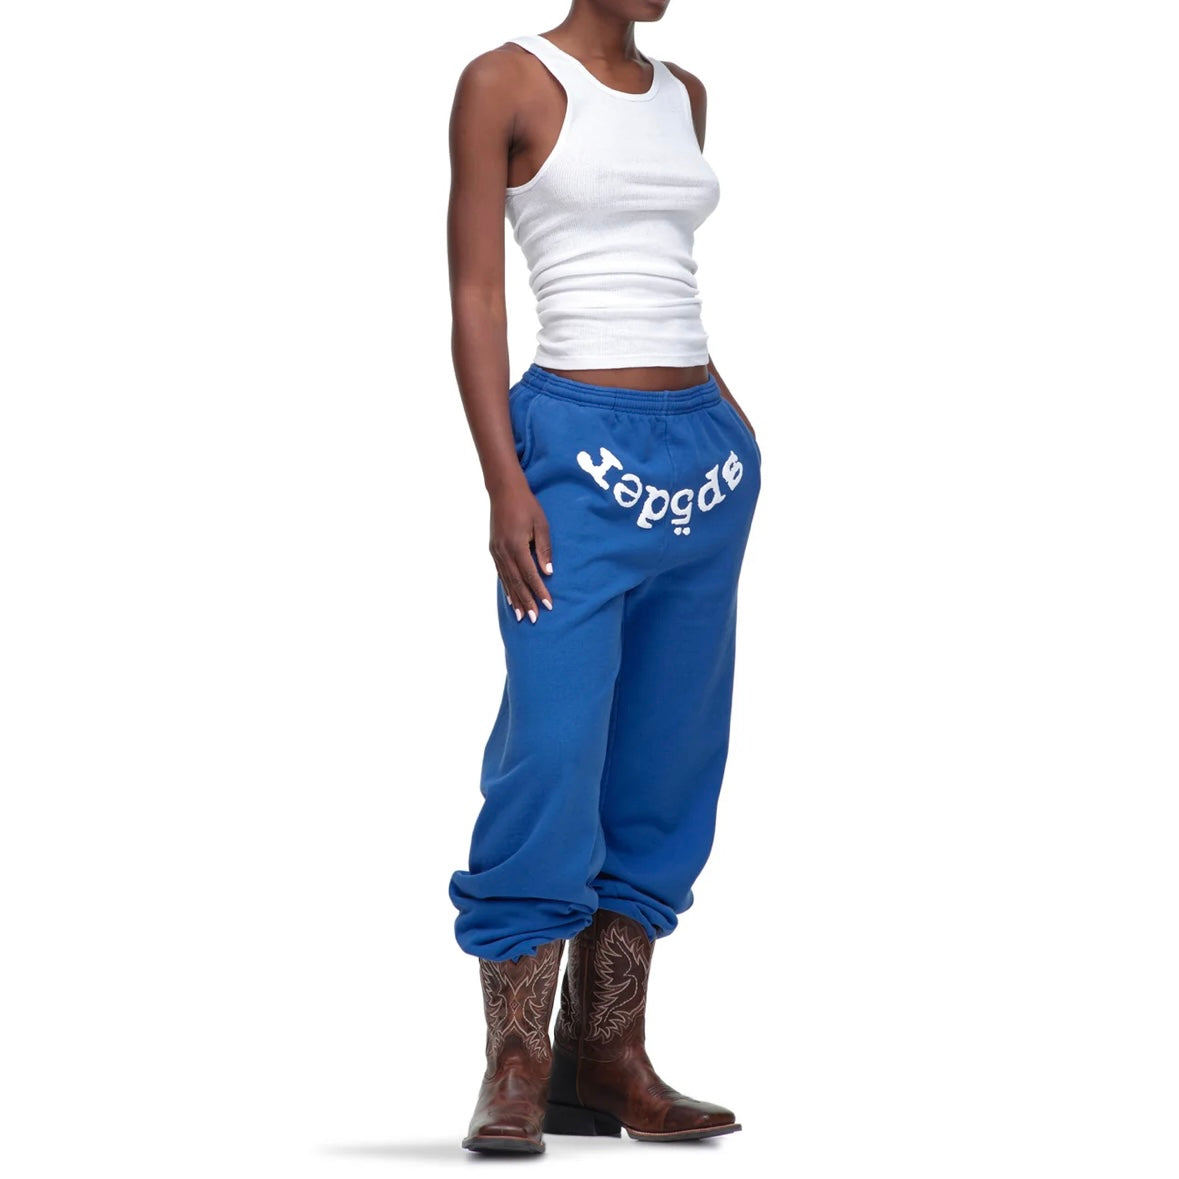 Sp5der Blue White Legacy Sweatpants On Body with Boots